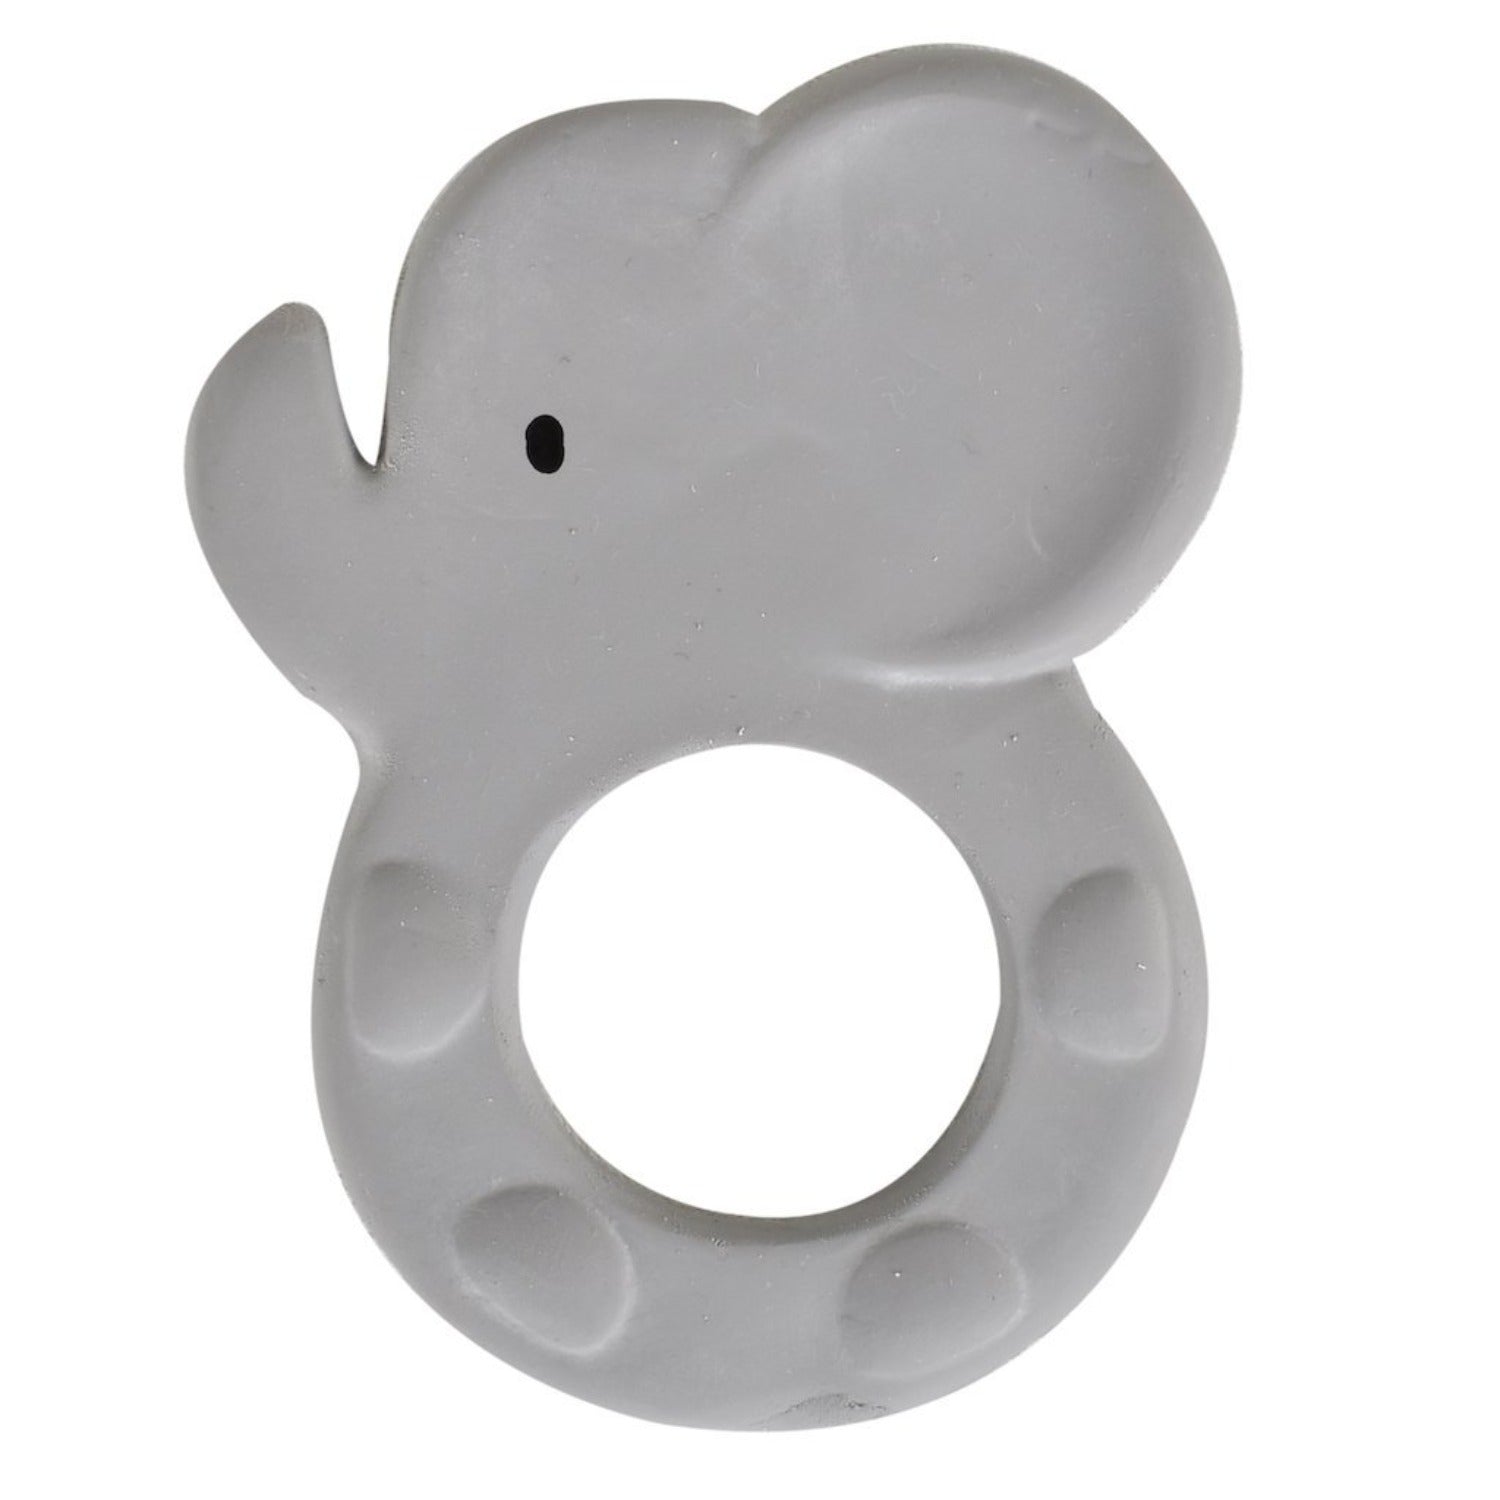 Elephant Natural Rubber Teether